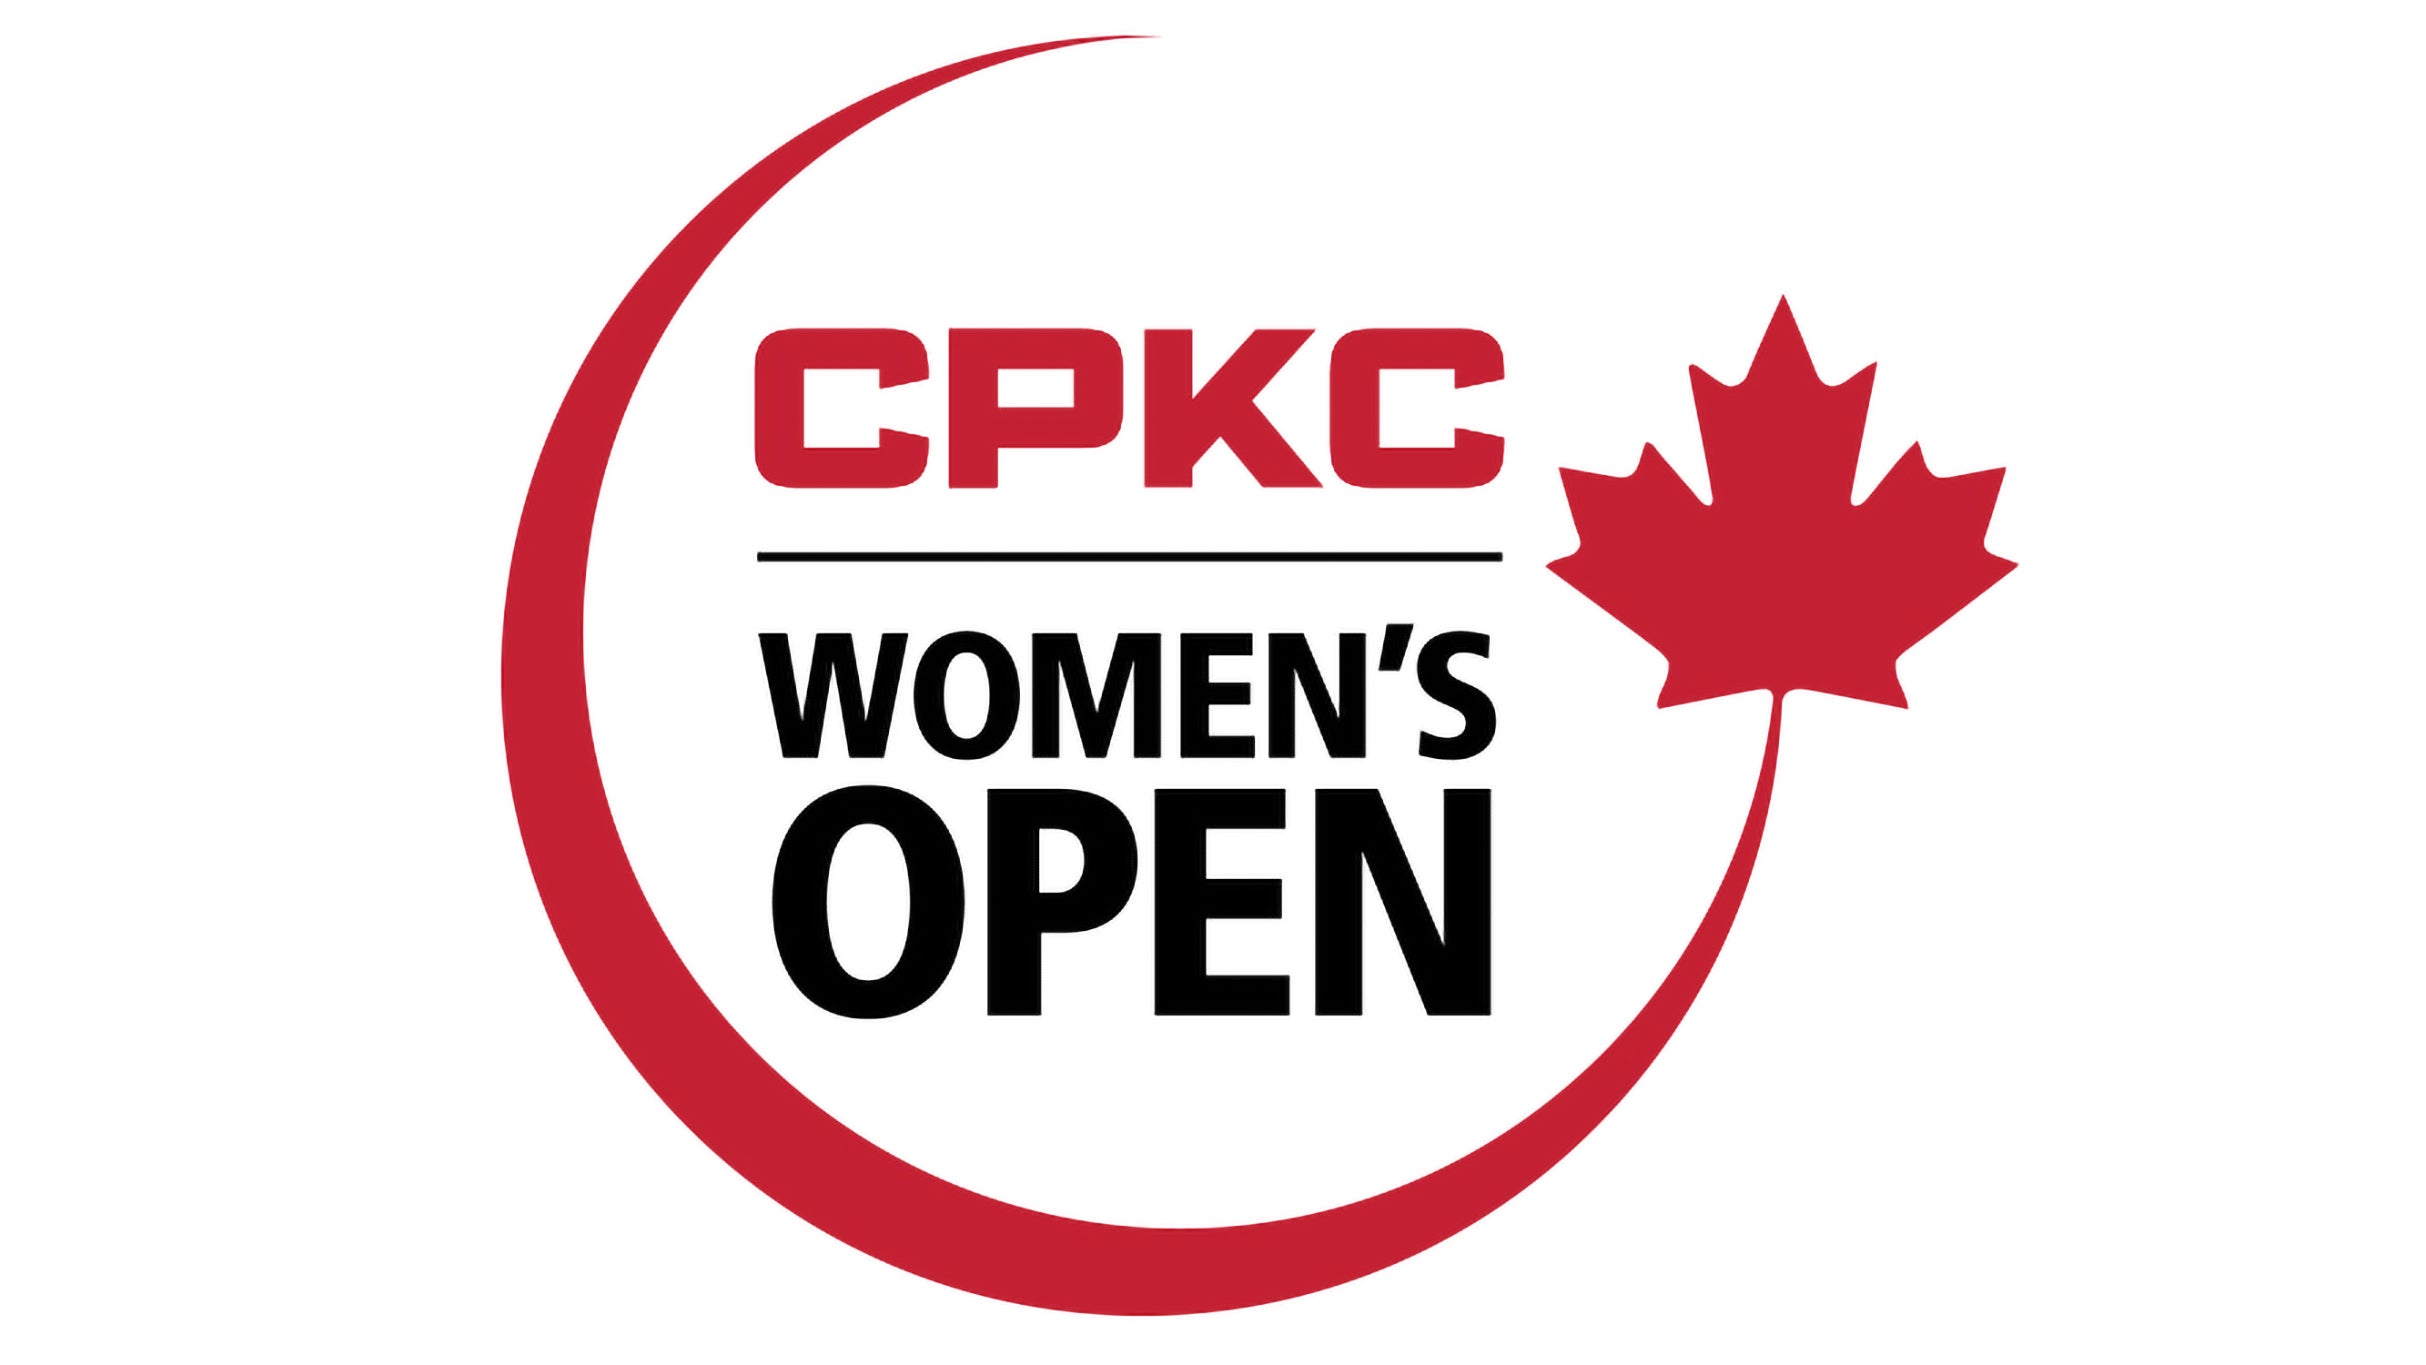 CPKC Women's Open - Sunday Tickets in Vancouver promo photo for Golf Canada Partner presale offer code